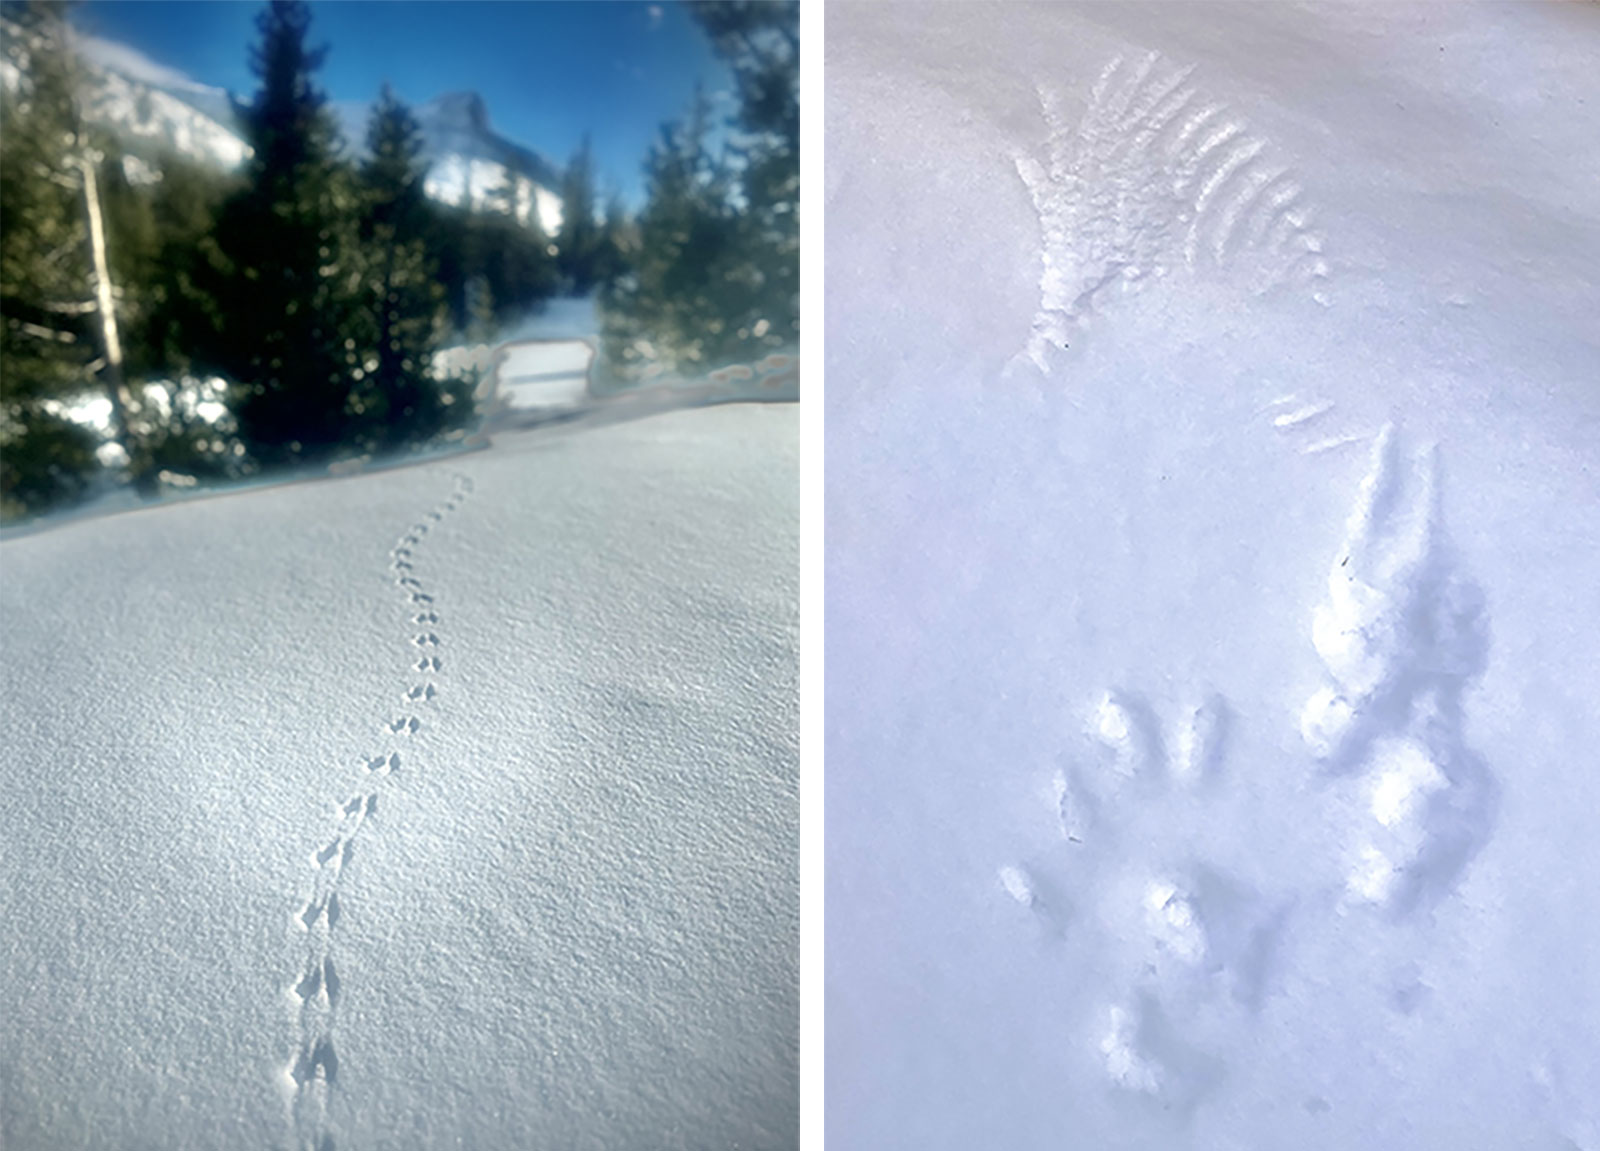 Left image: Mouse tracks in snow; Right image: Wing prints in snow.